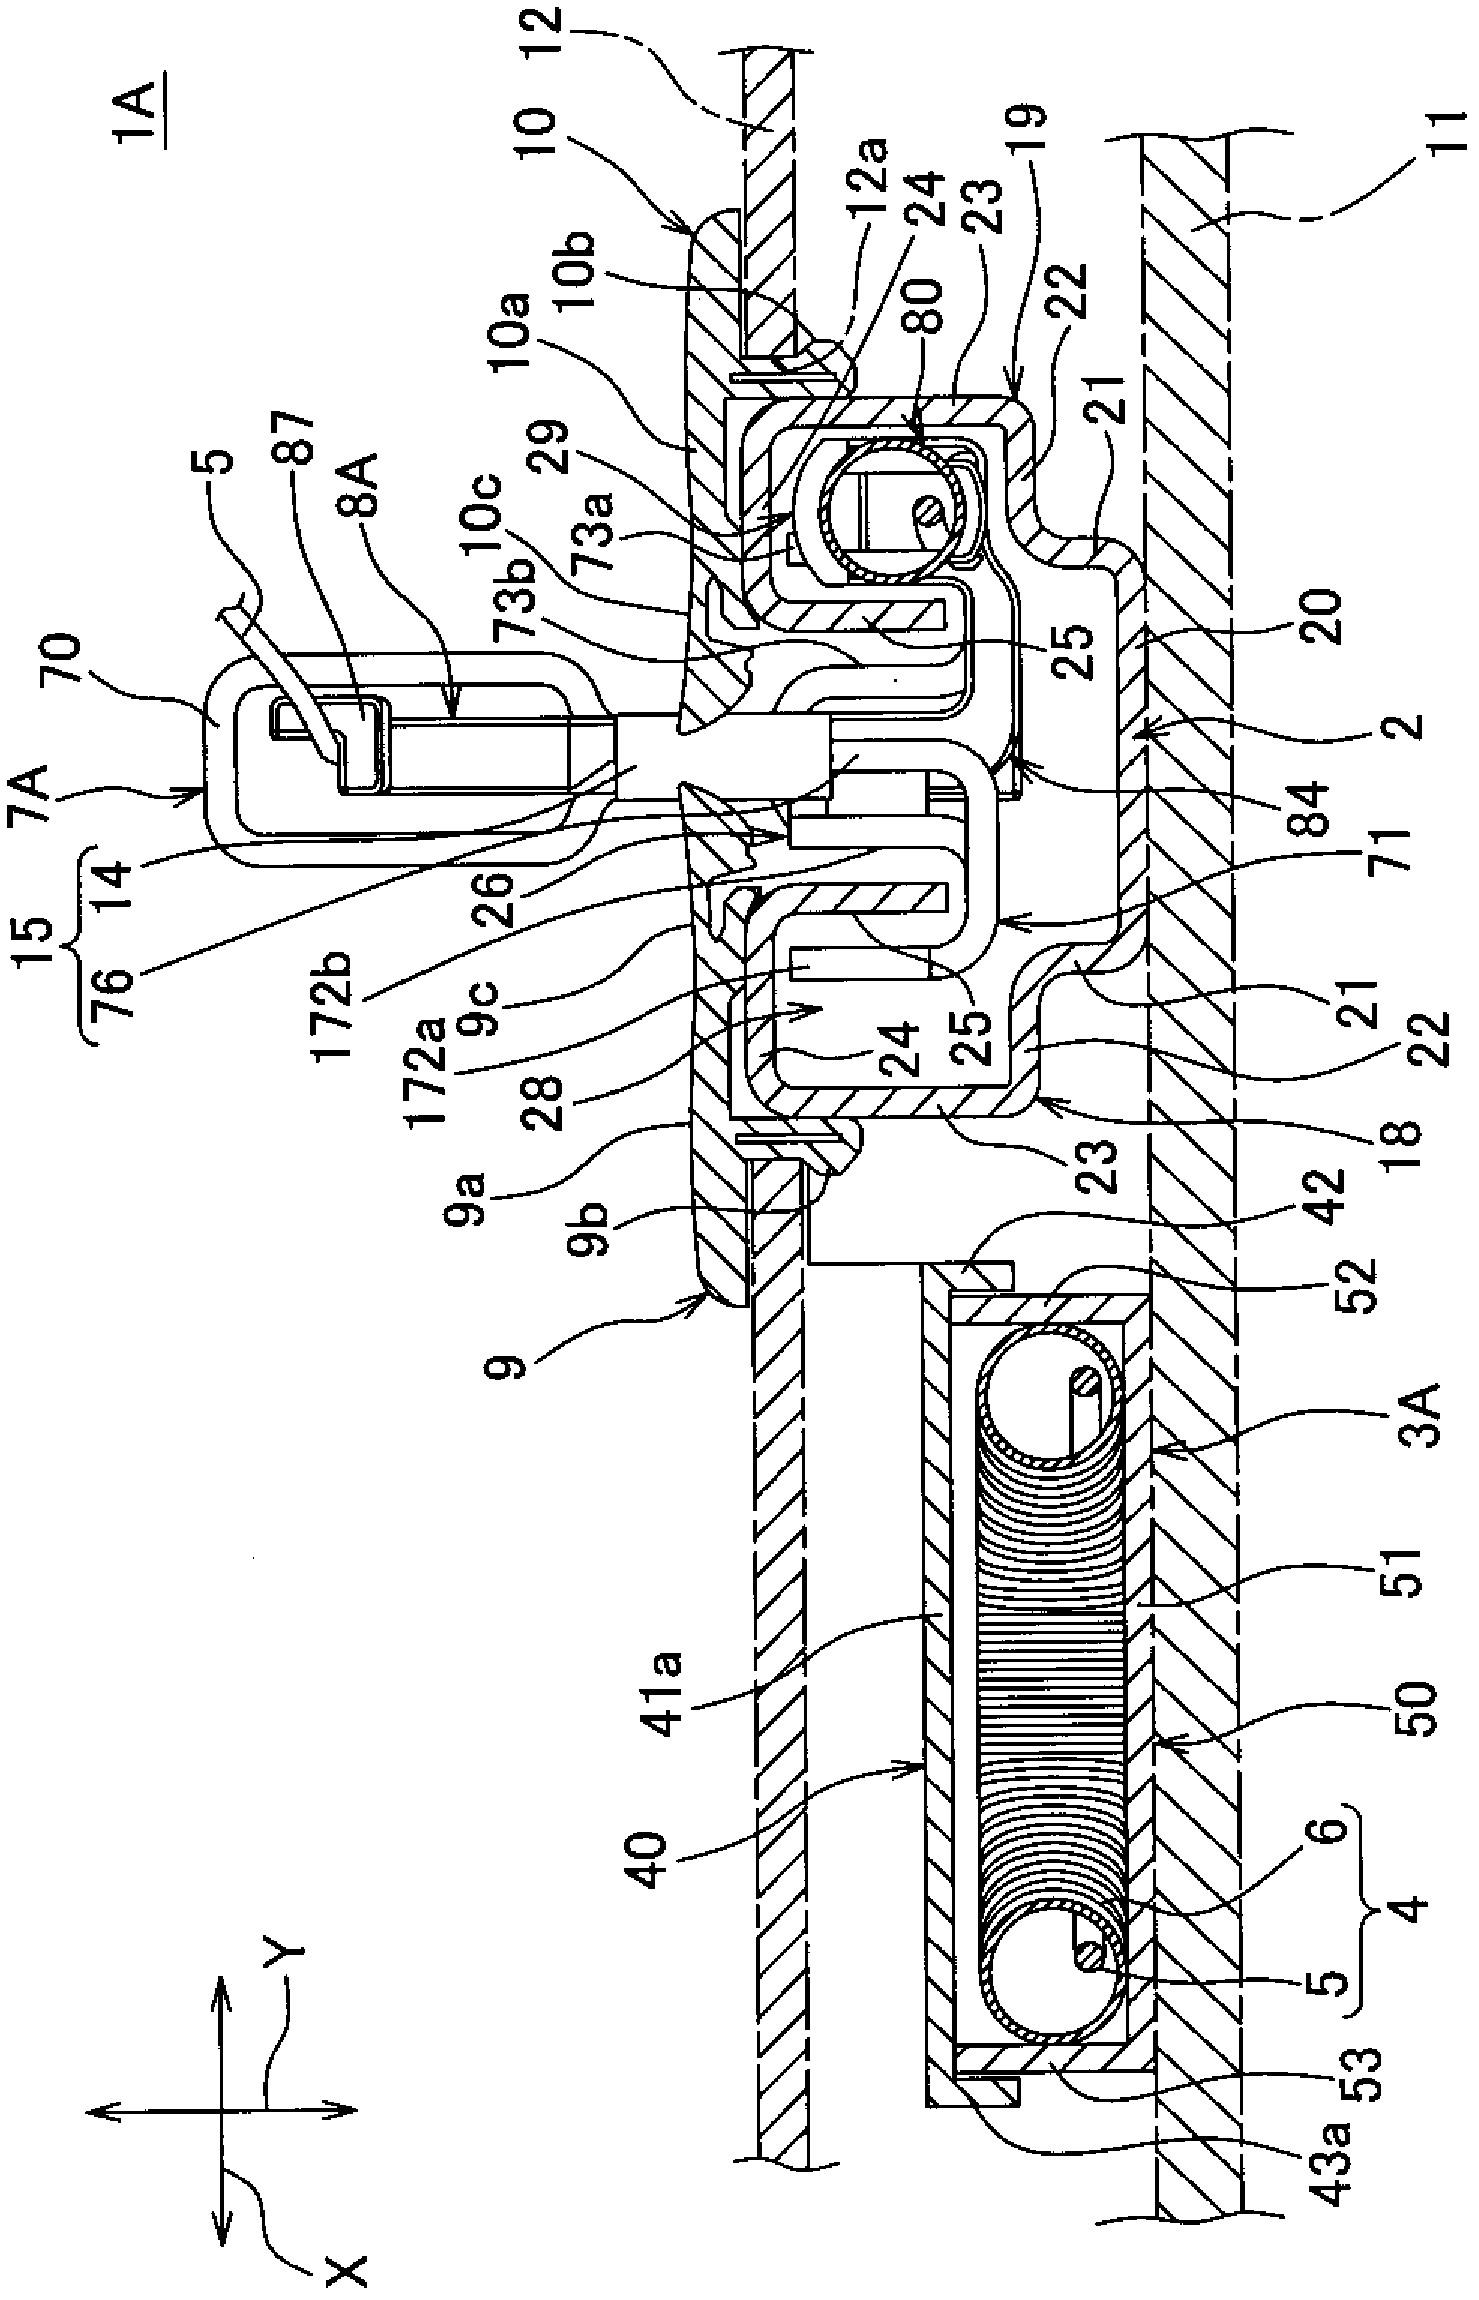 Wire harness routing device